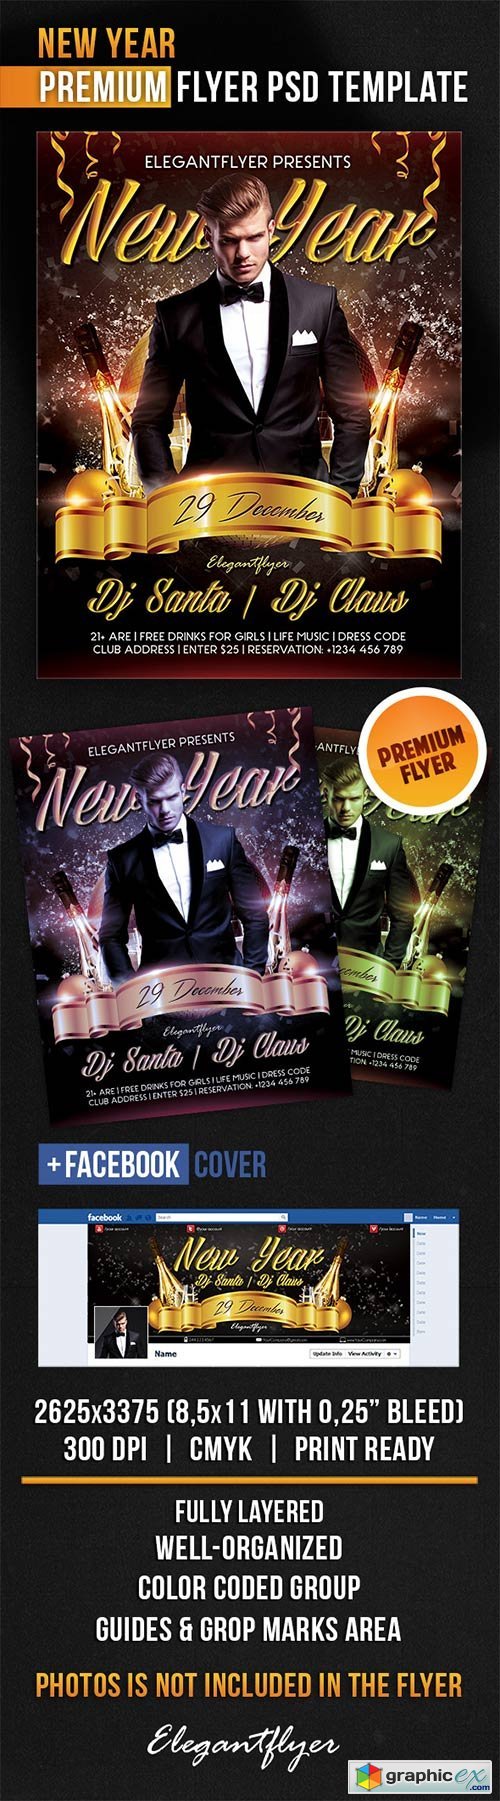 New Year Flyer PSD Template + Facebook Cover